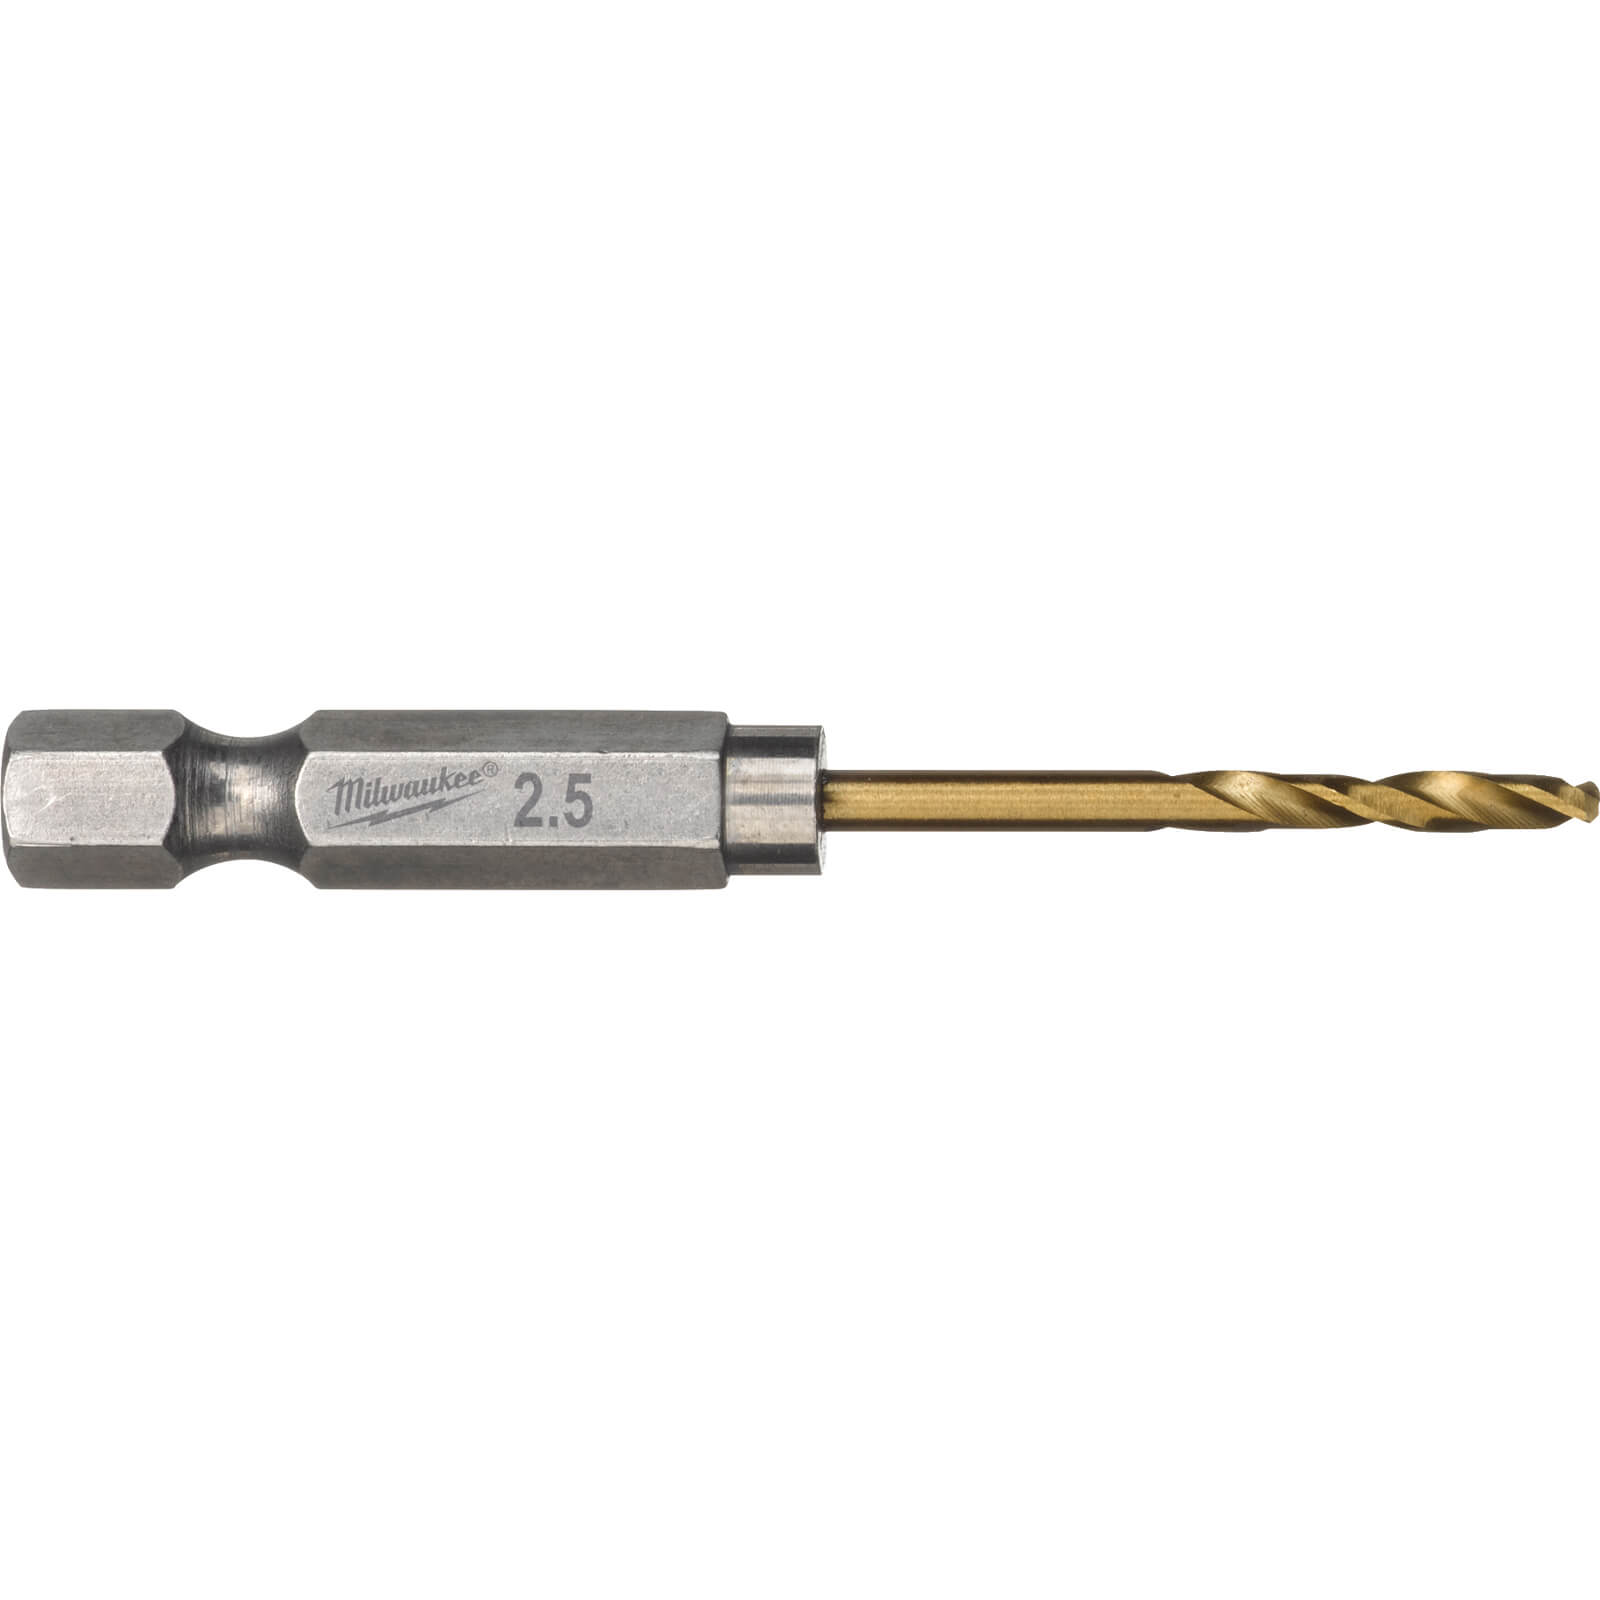 Image of Milwaukee HSS-G Shockwave Drill Bit 2.5mm Pack of 10